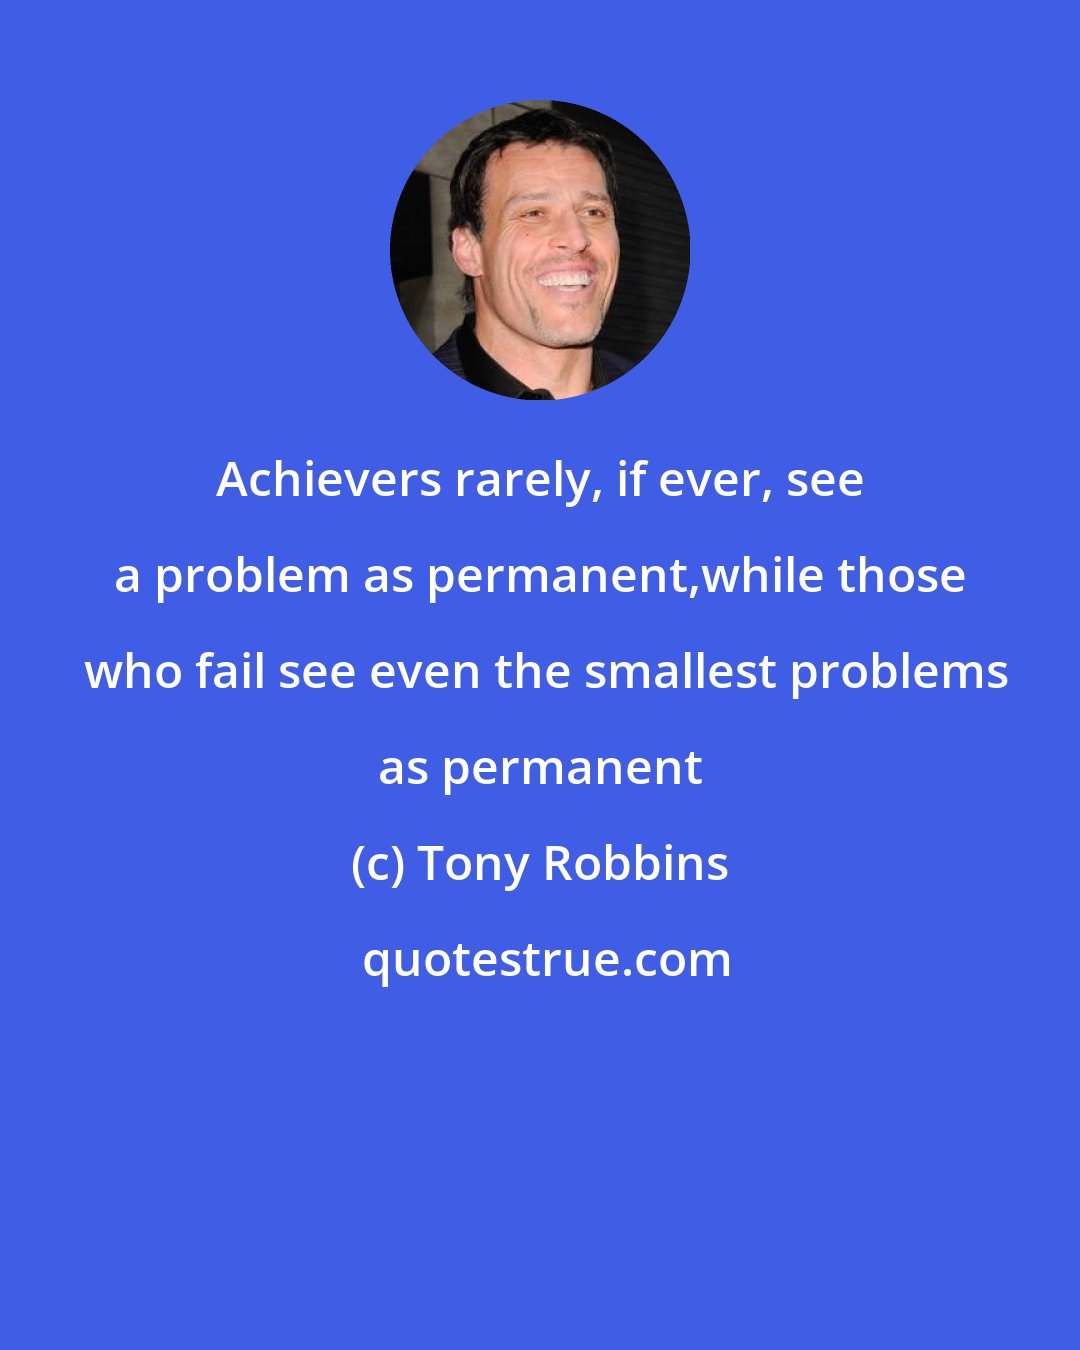 Tony Robbins: Achievers rarely, if ever, see a problem as permanent,while those  who fail see even the smallest problems as permanent